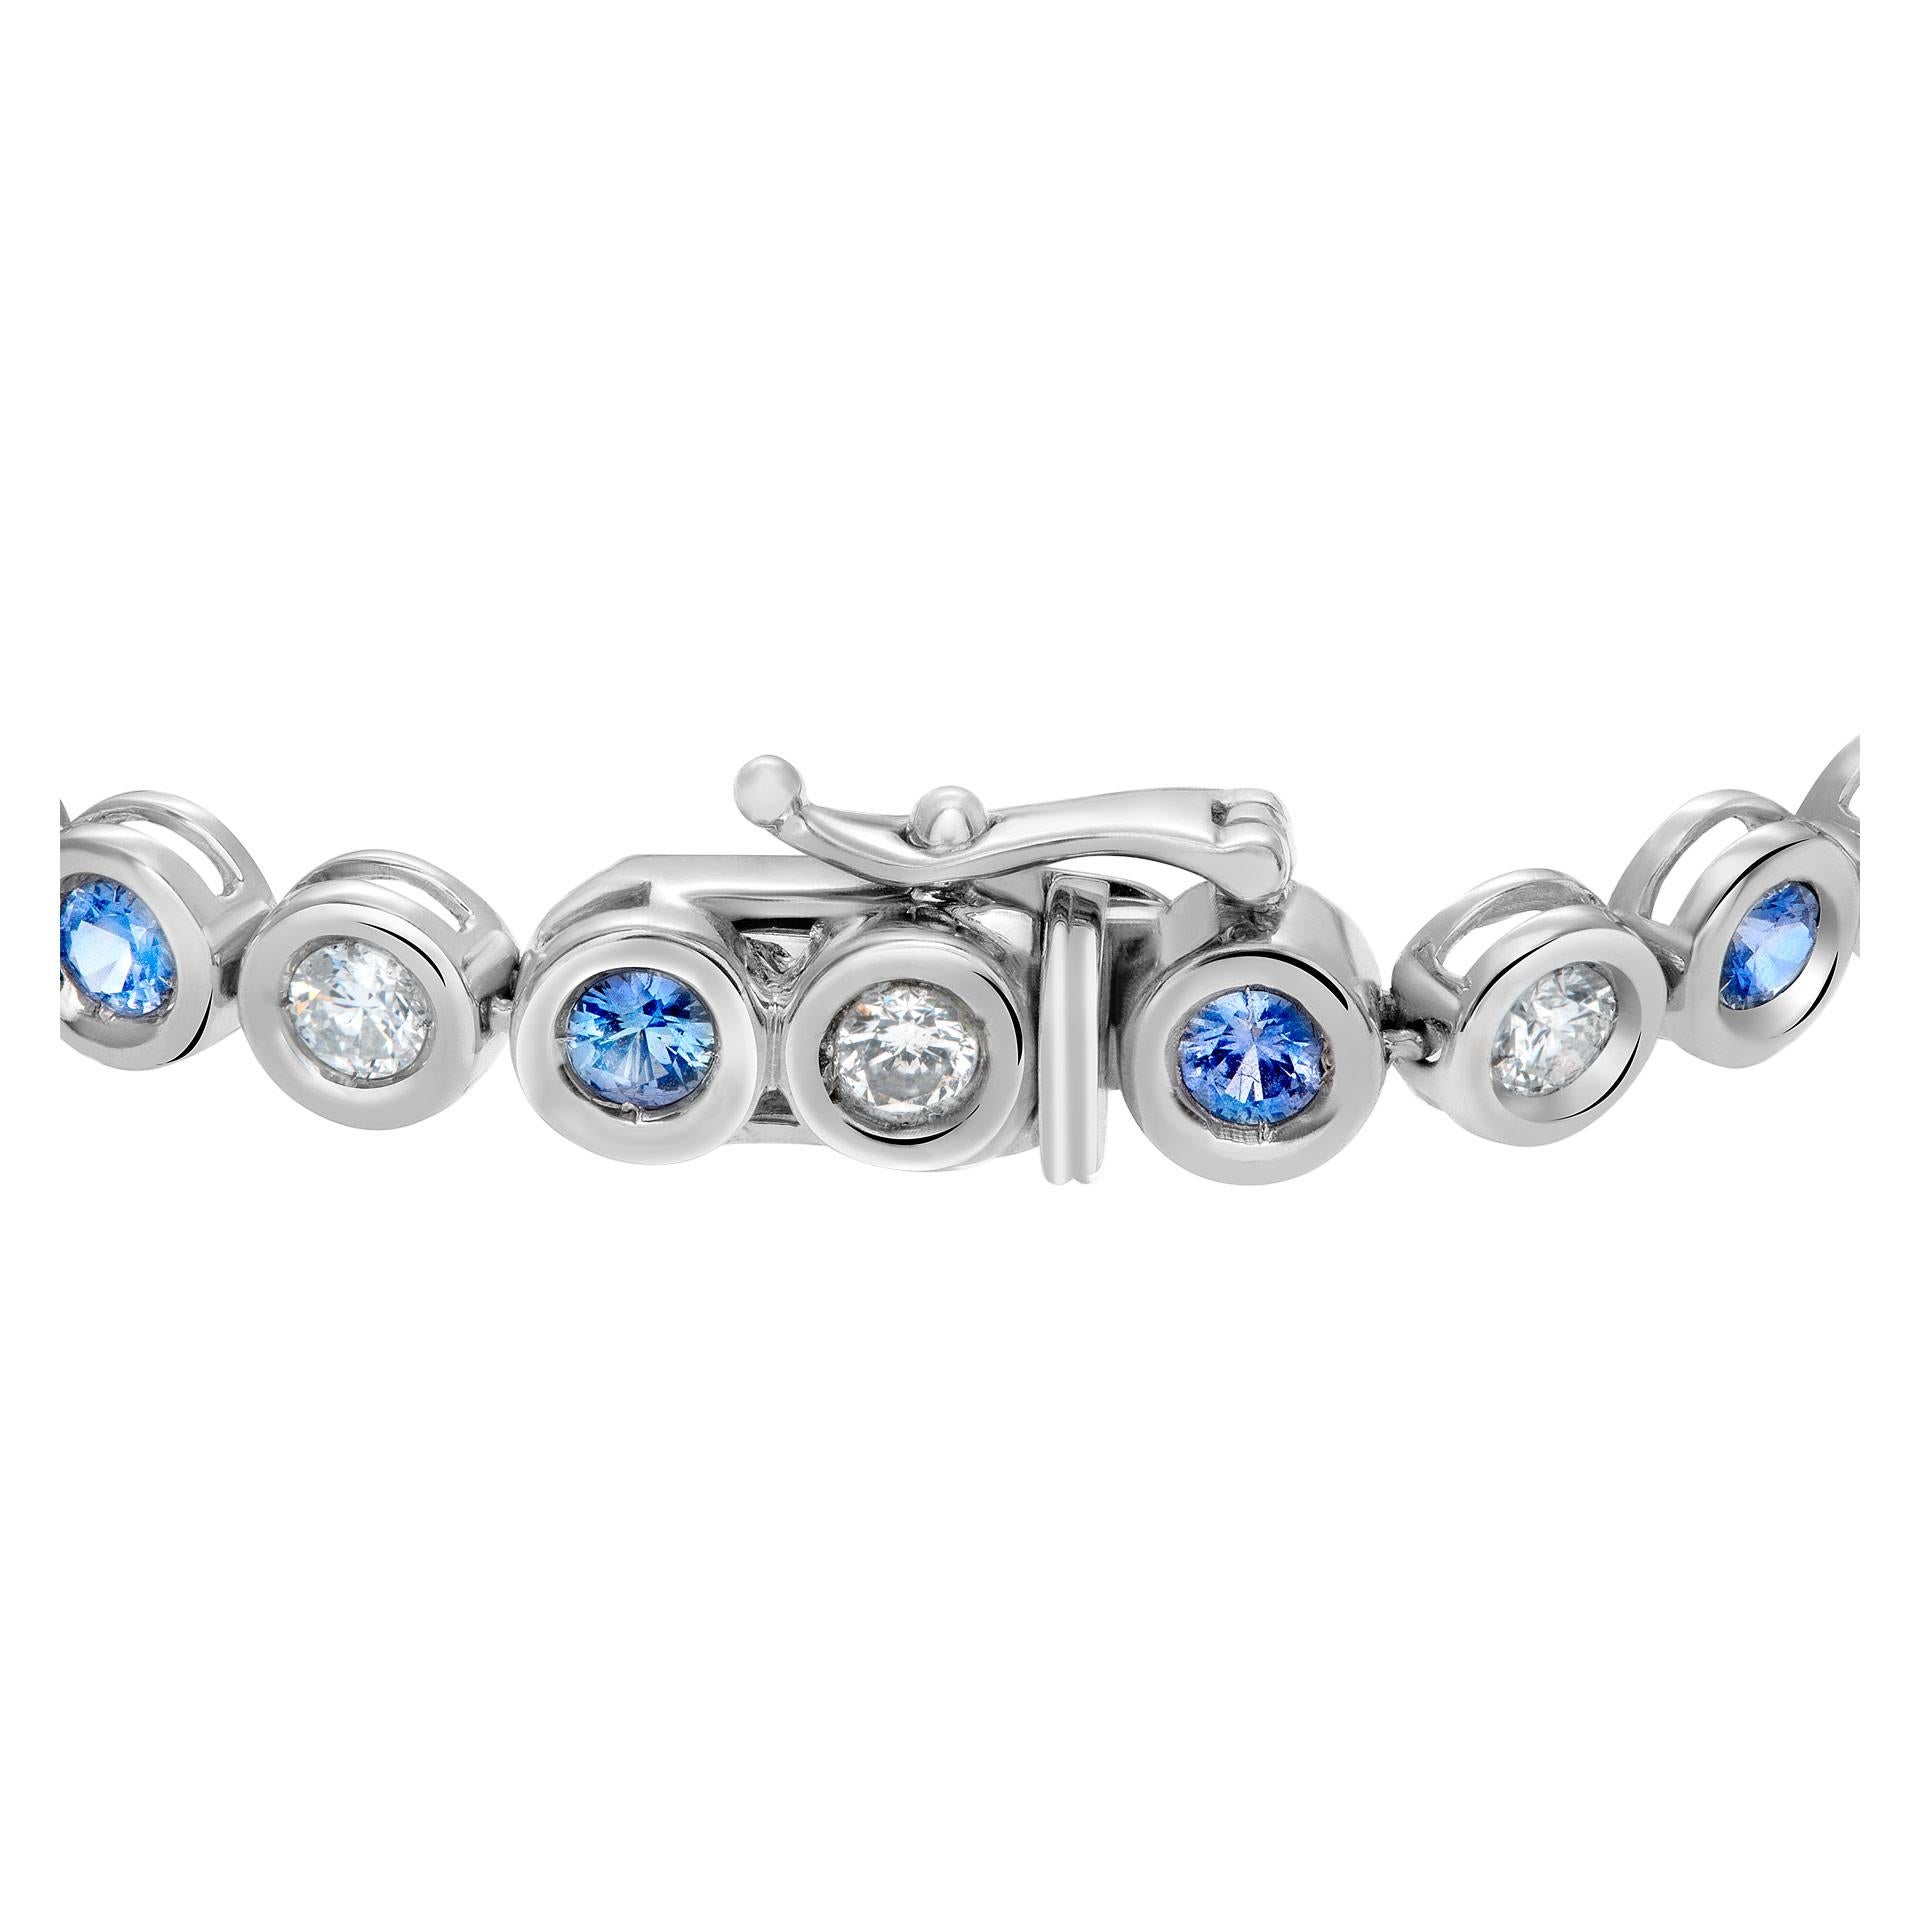 Bezel set blue sapphire and diamond line bracelet in 18k white gold; Approximately 1.48 carats in G-H color, VS-SI clarity round dimonds and approximately 1.62 carats in round cut sapphires.  Width: 5mm (0.19